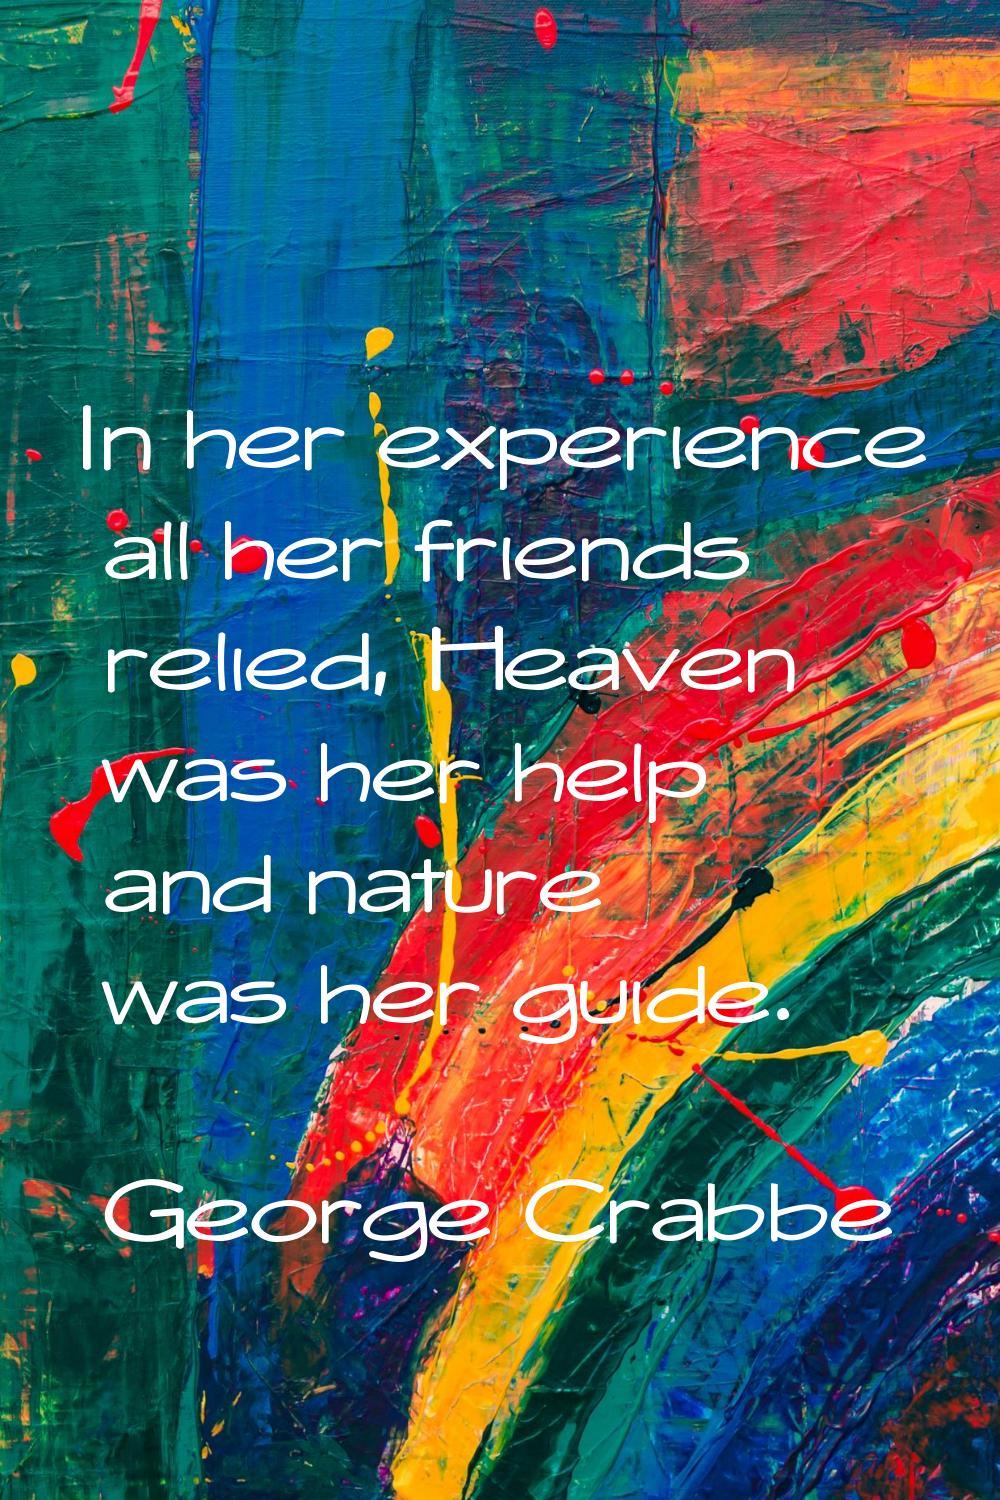 In her experience all her friends relied, Heaven was her help and nature was her guide.